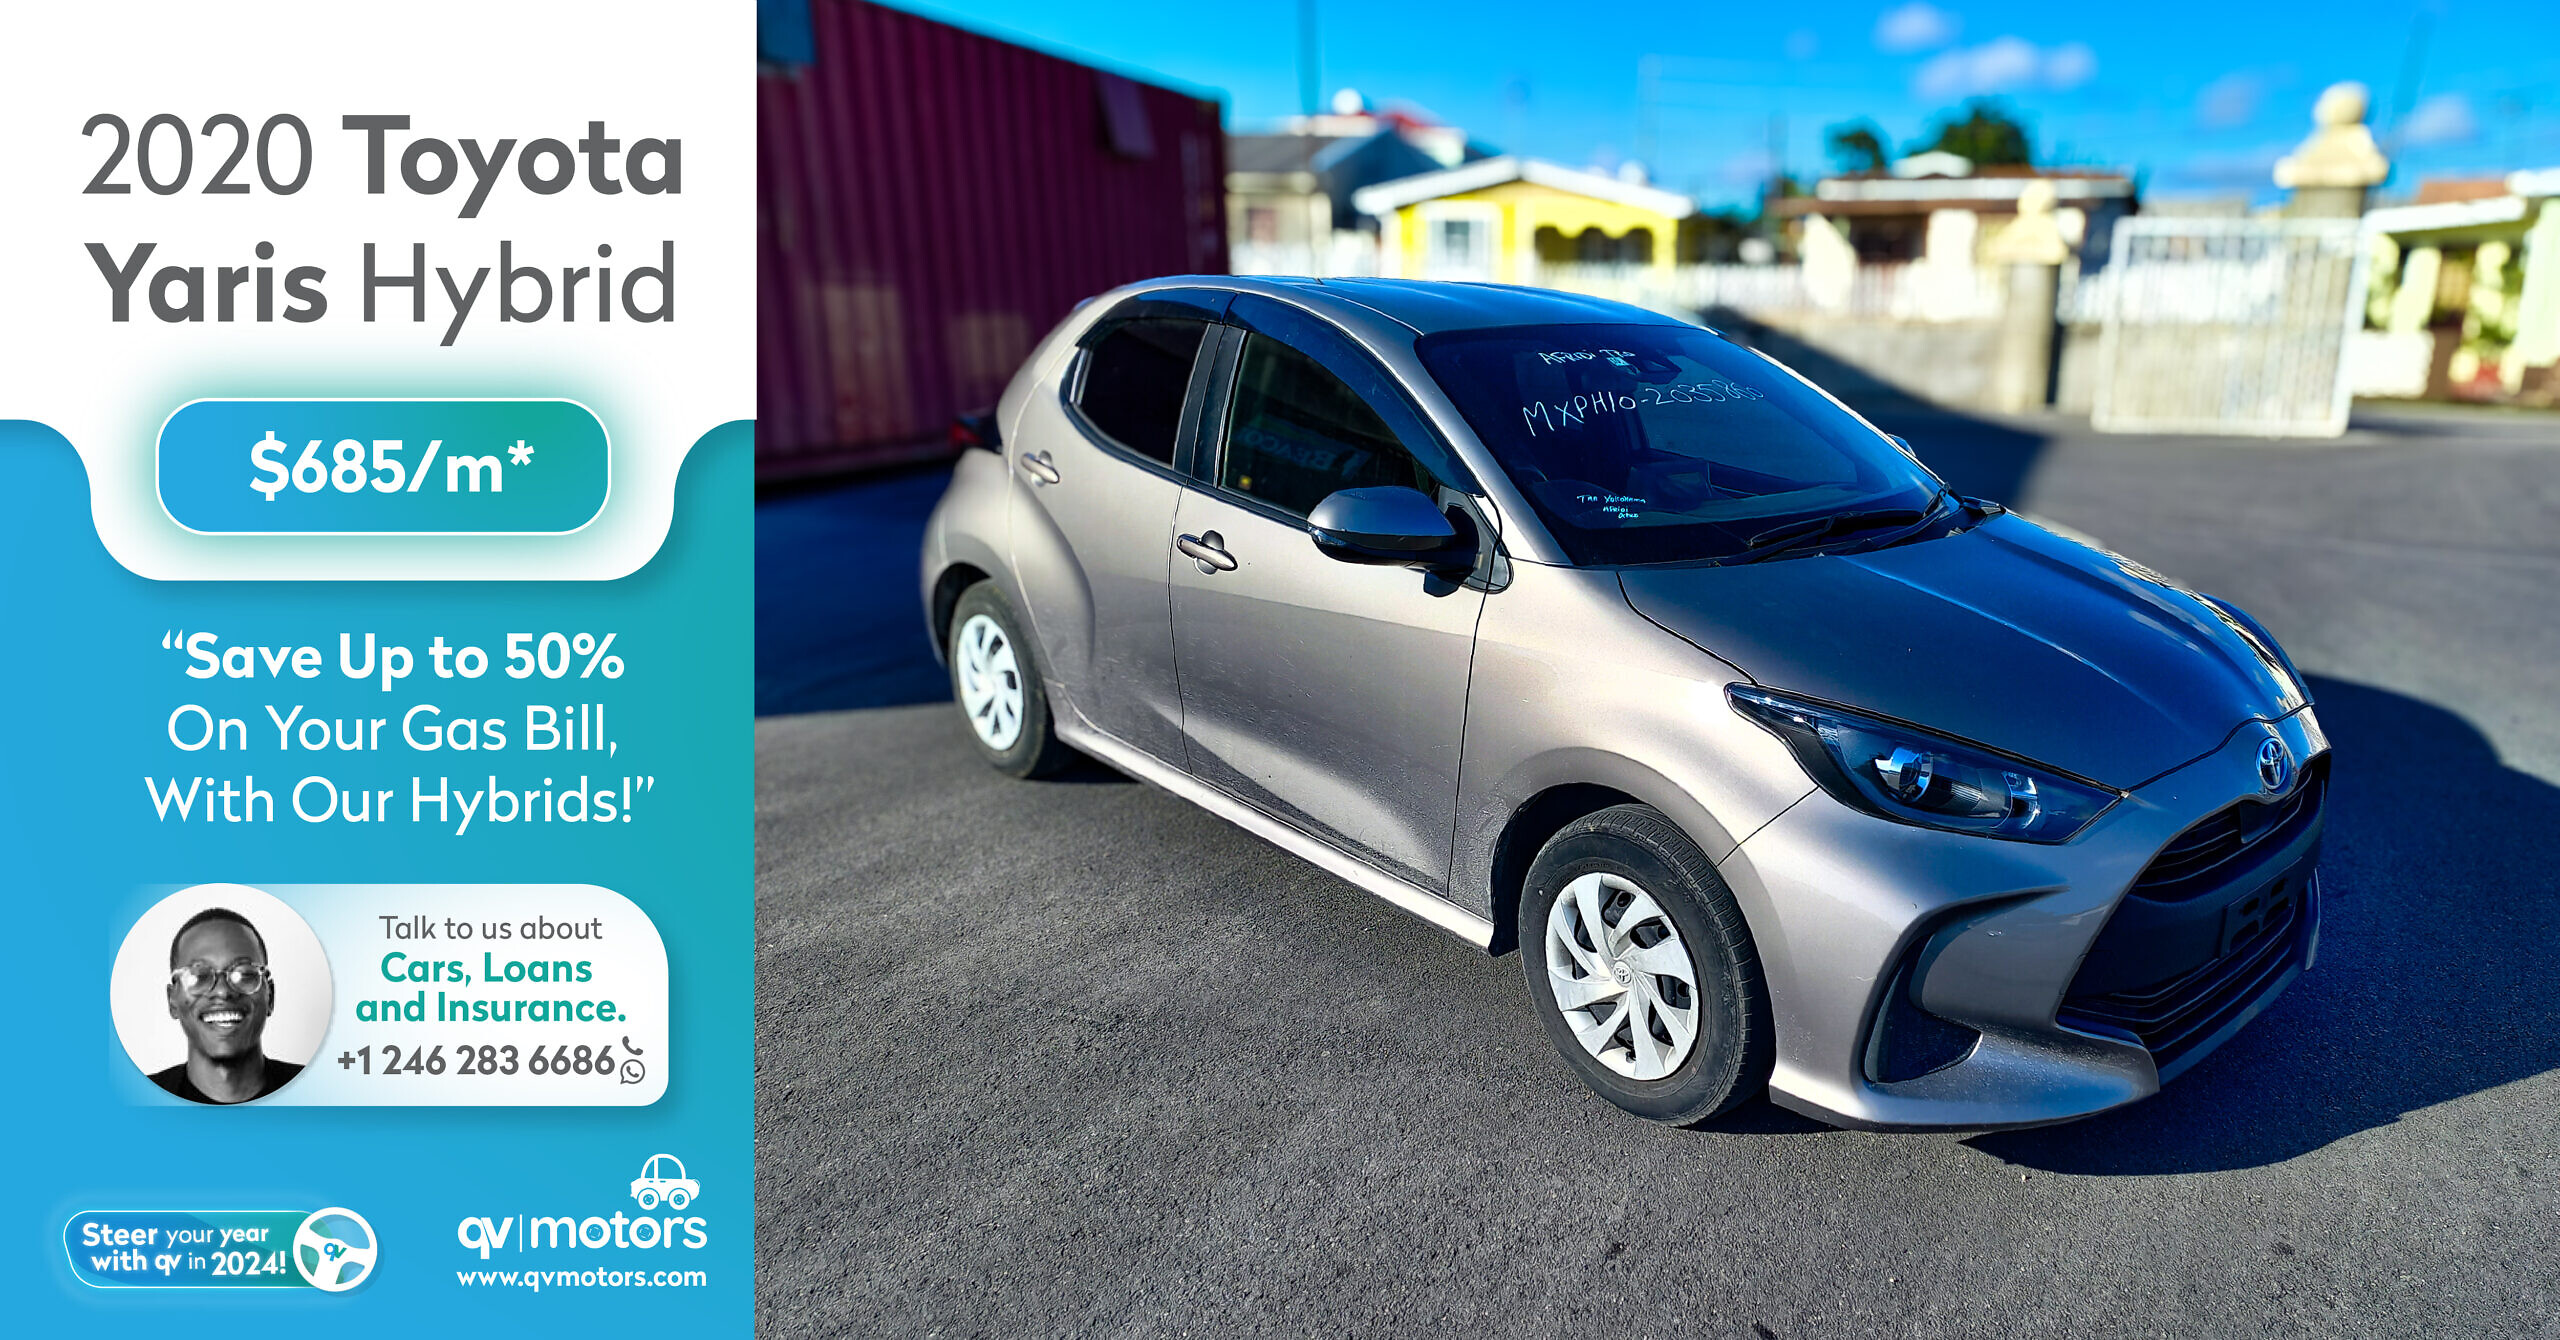 2020 Toyota Yaris Hybrid – Save up to 50% on gas!